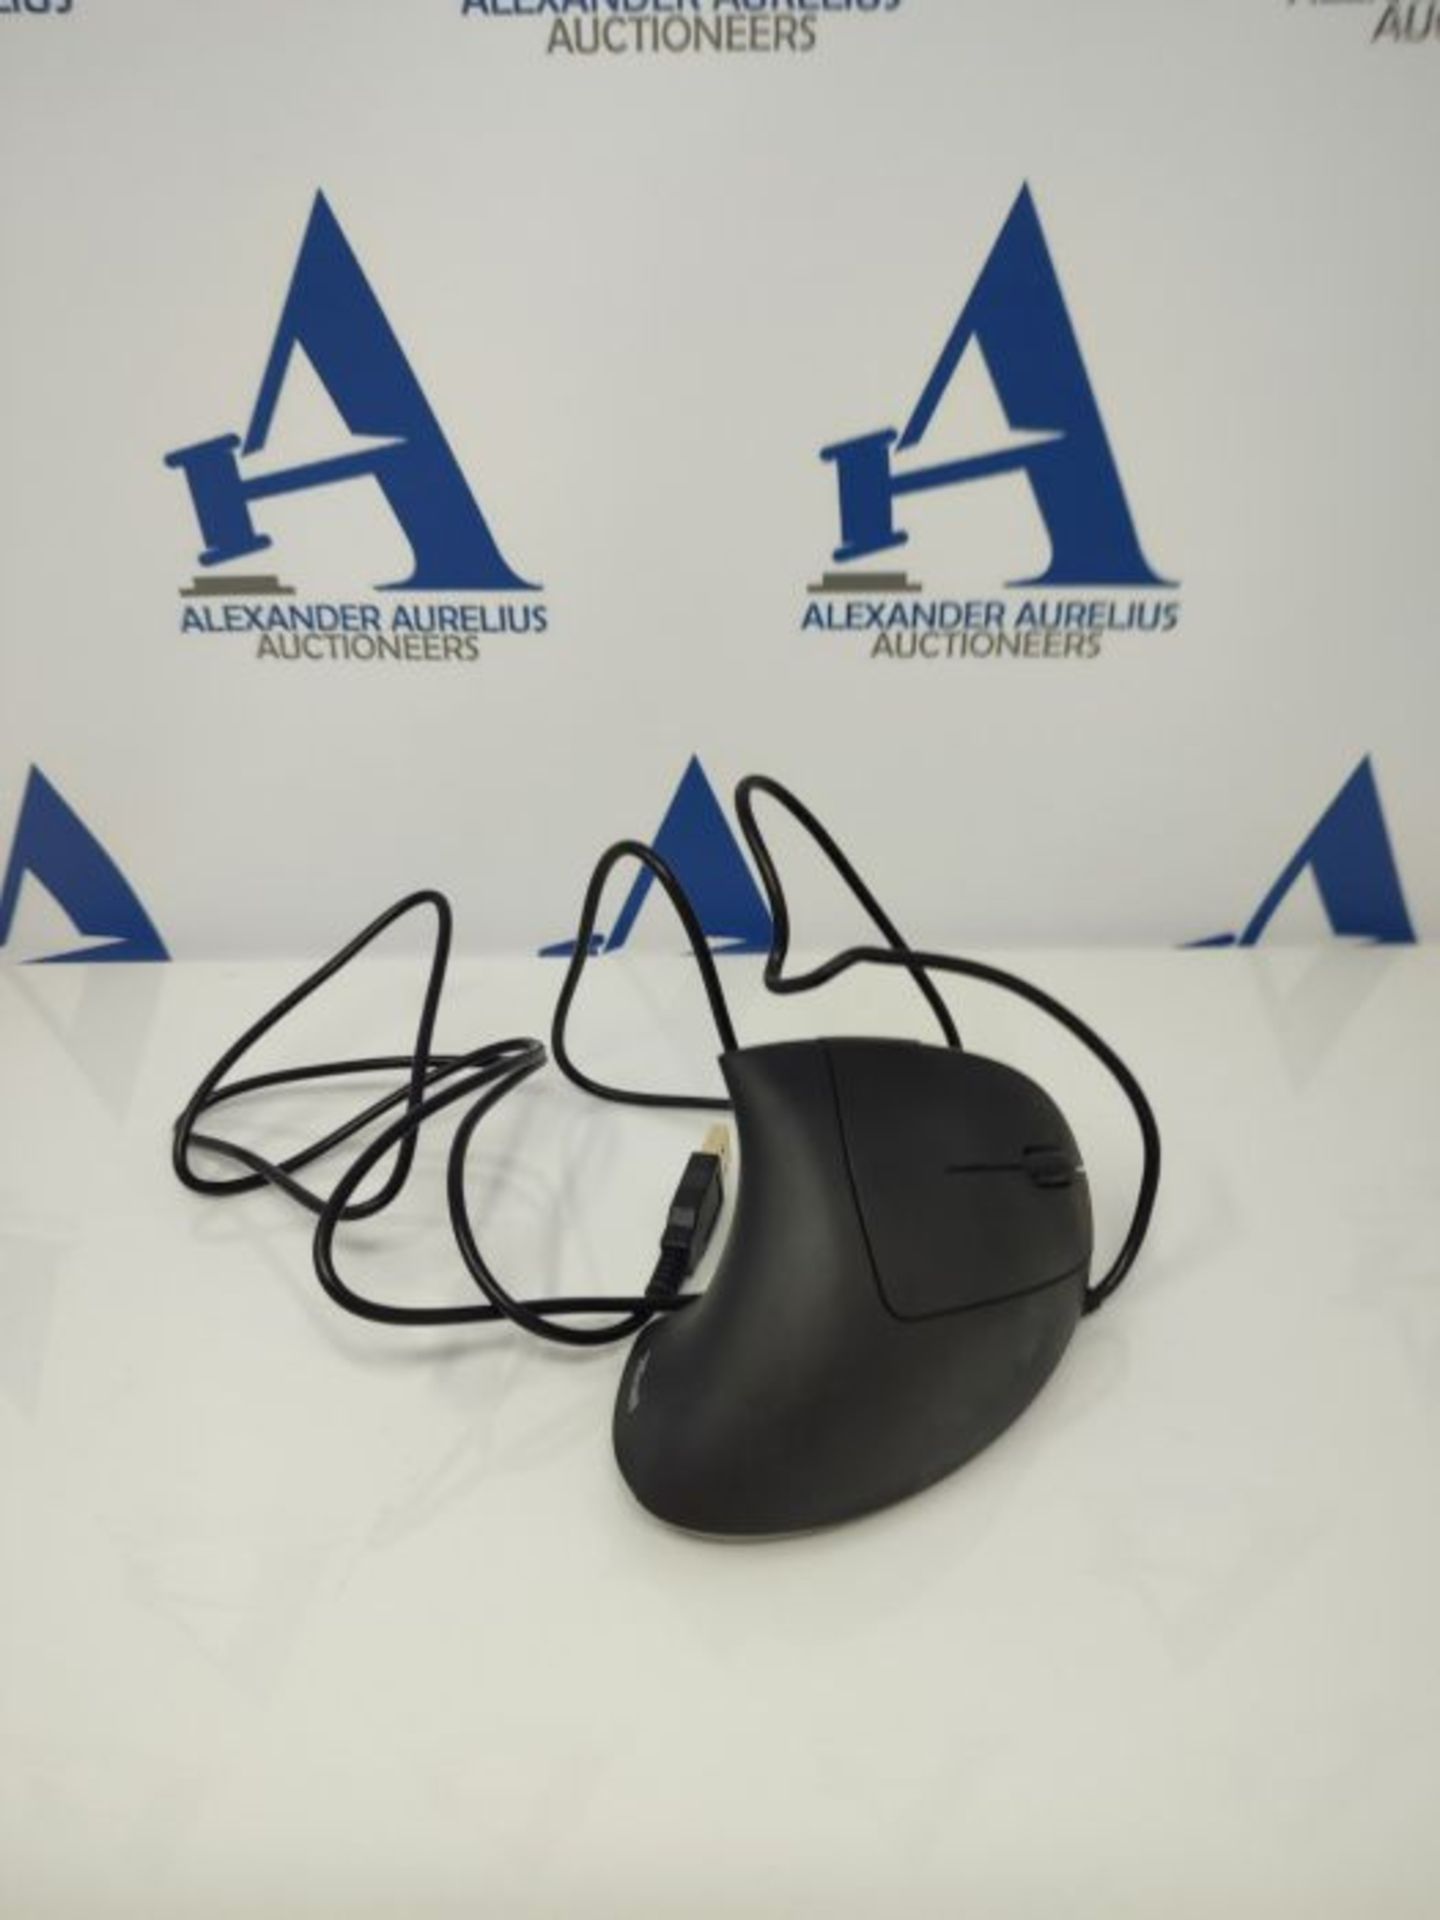 Trust Verto Wired Ergonomic Mouse, Vertical Mouse with LED Illumination, 1000-1600 DPI - Image 3 of 3